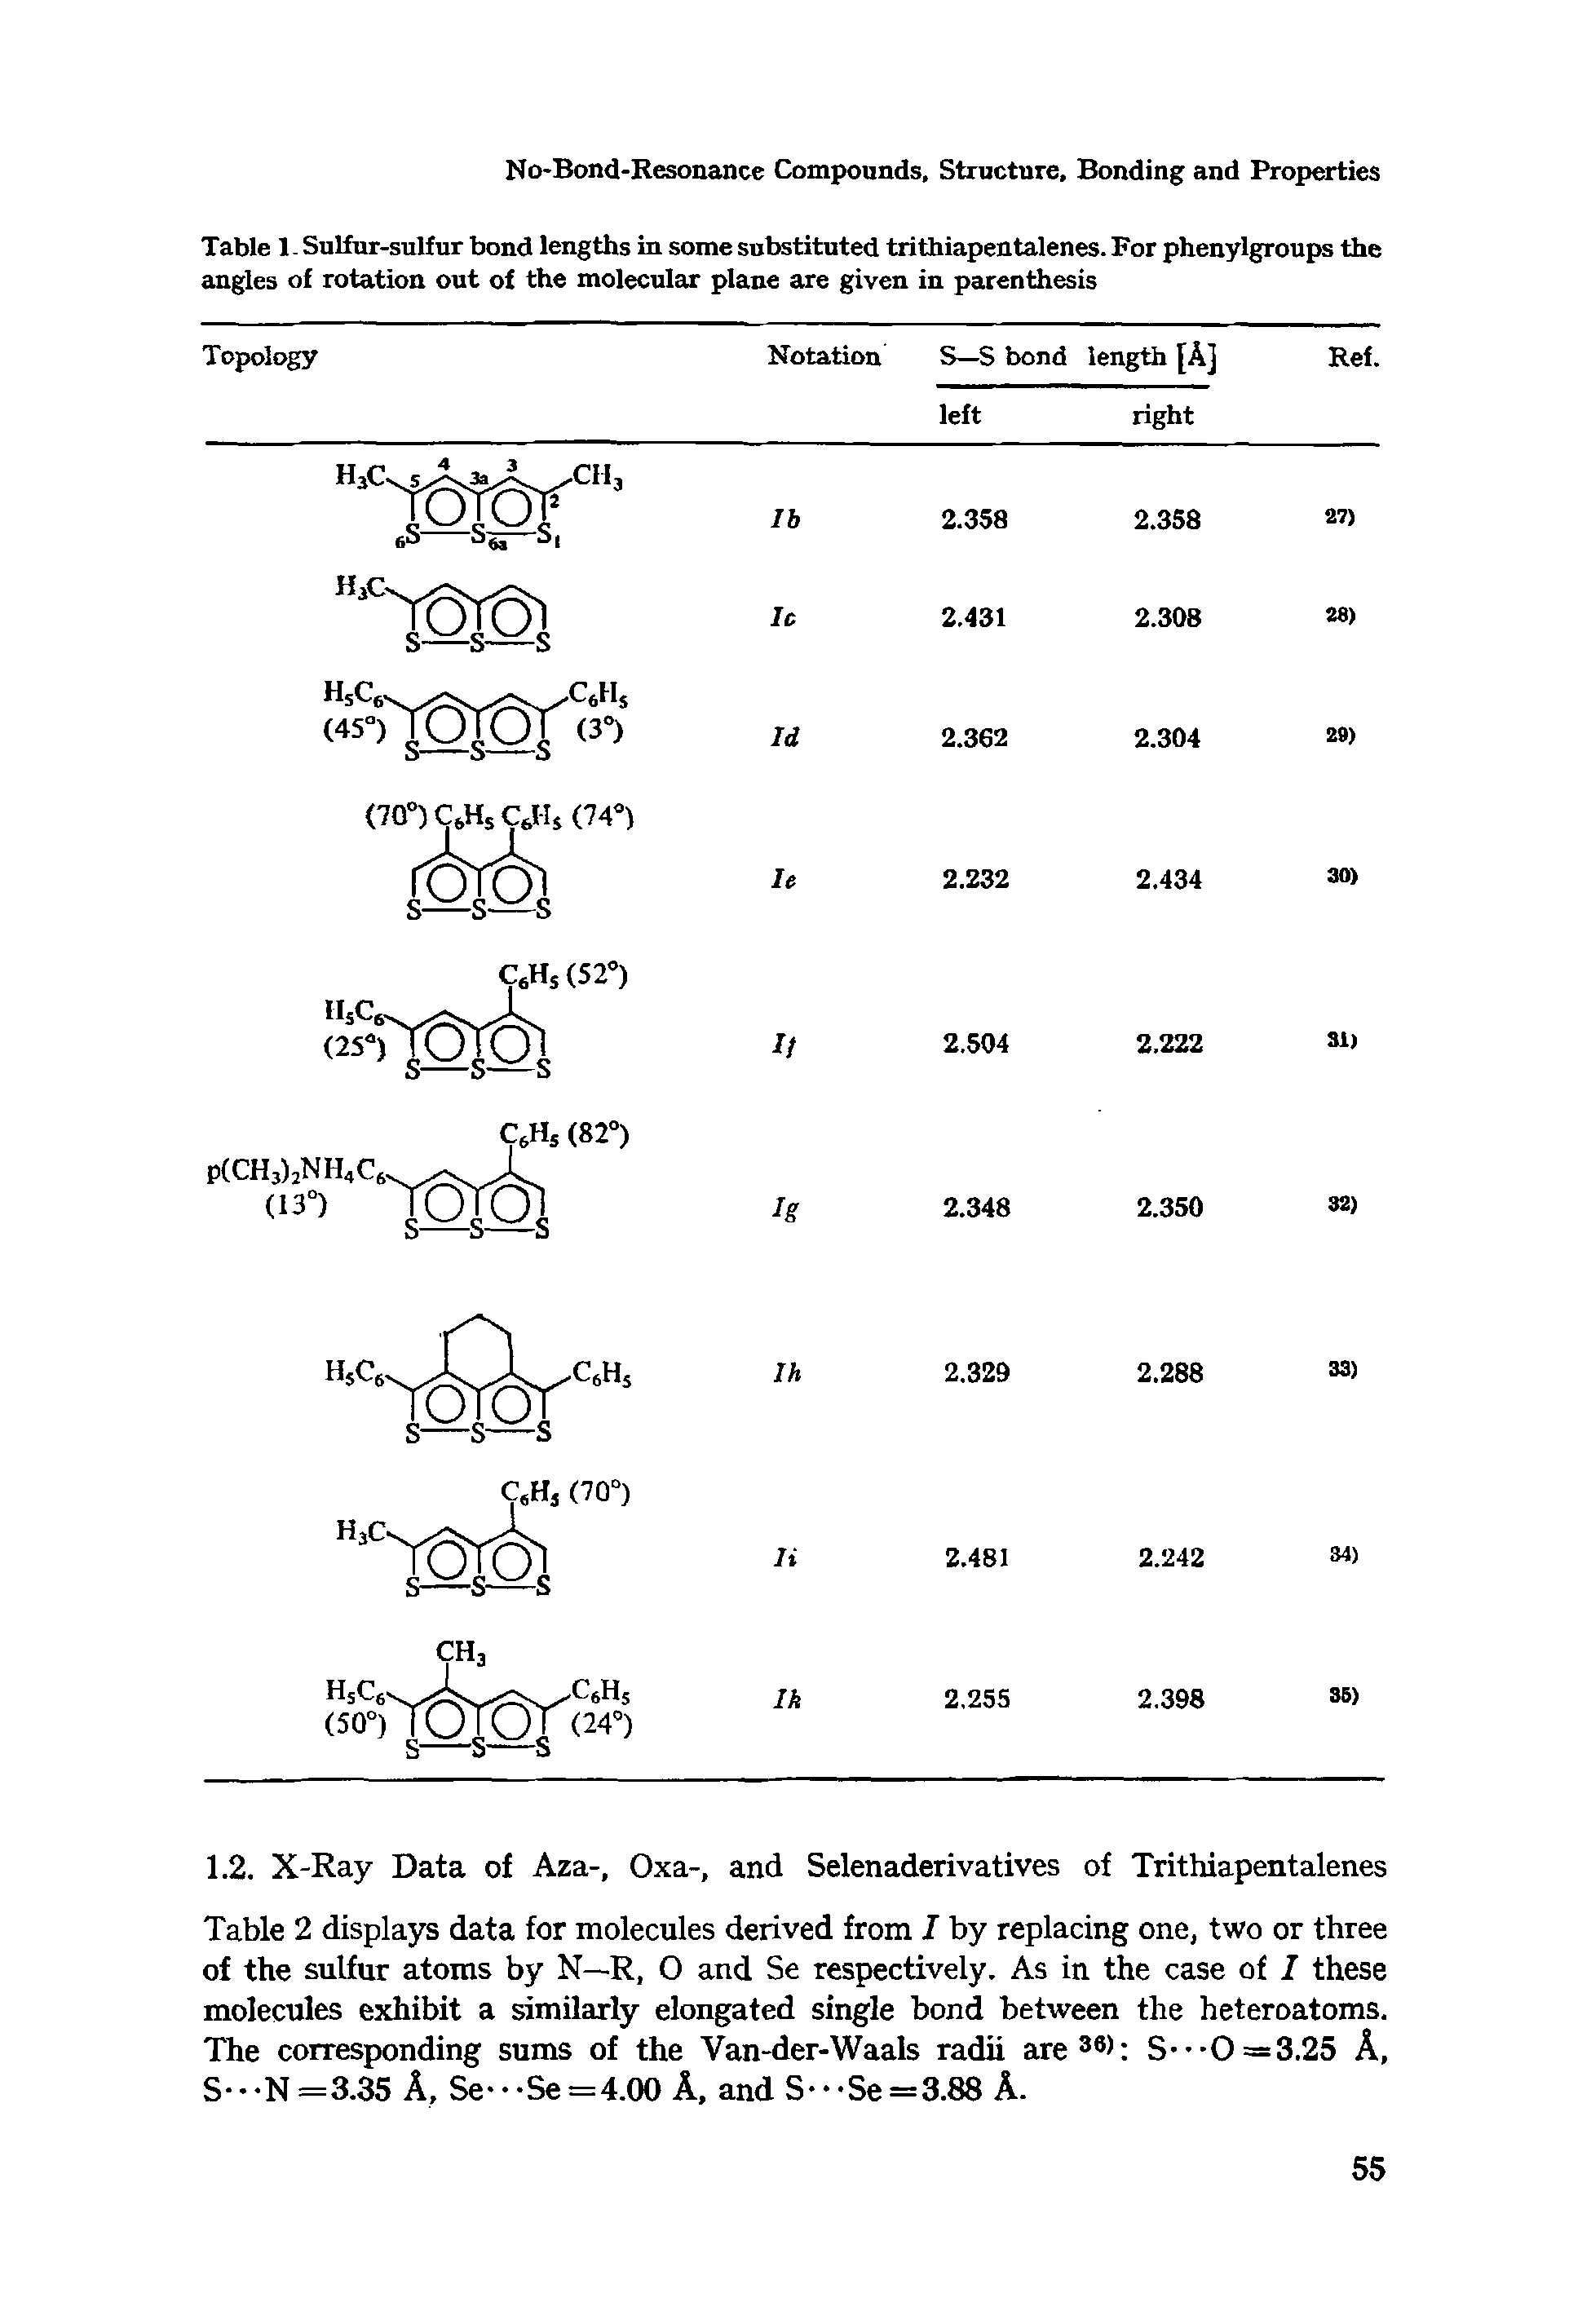 Table 1. Sulfur-sulfur bond lengths in some substituted trithiapentalenes. For phenylgroups the angles of rotation out of the molecular plane are given in parenthesis...